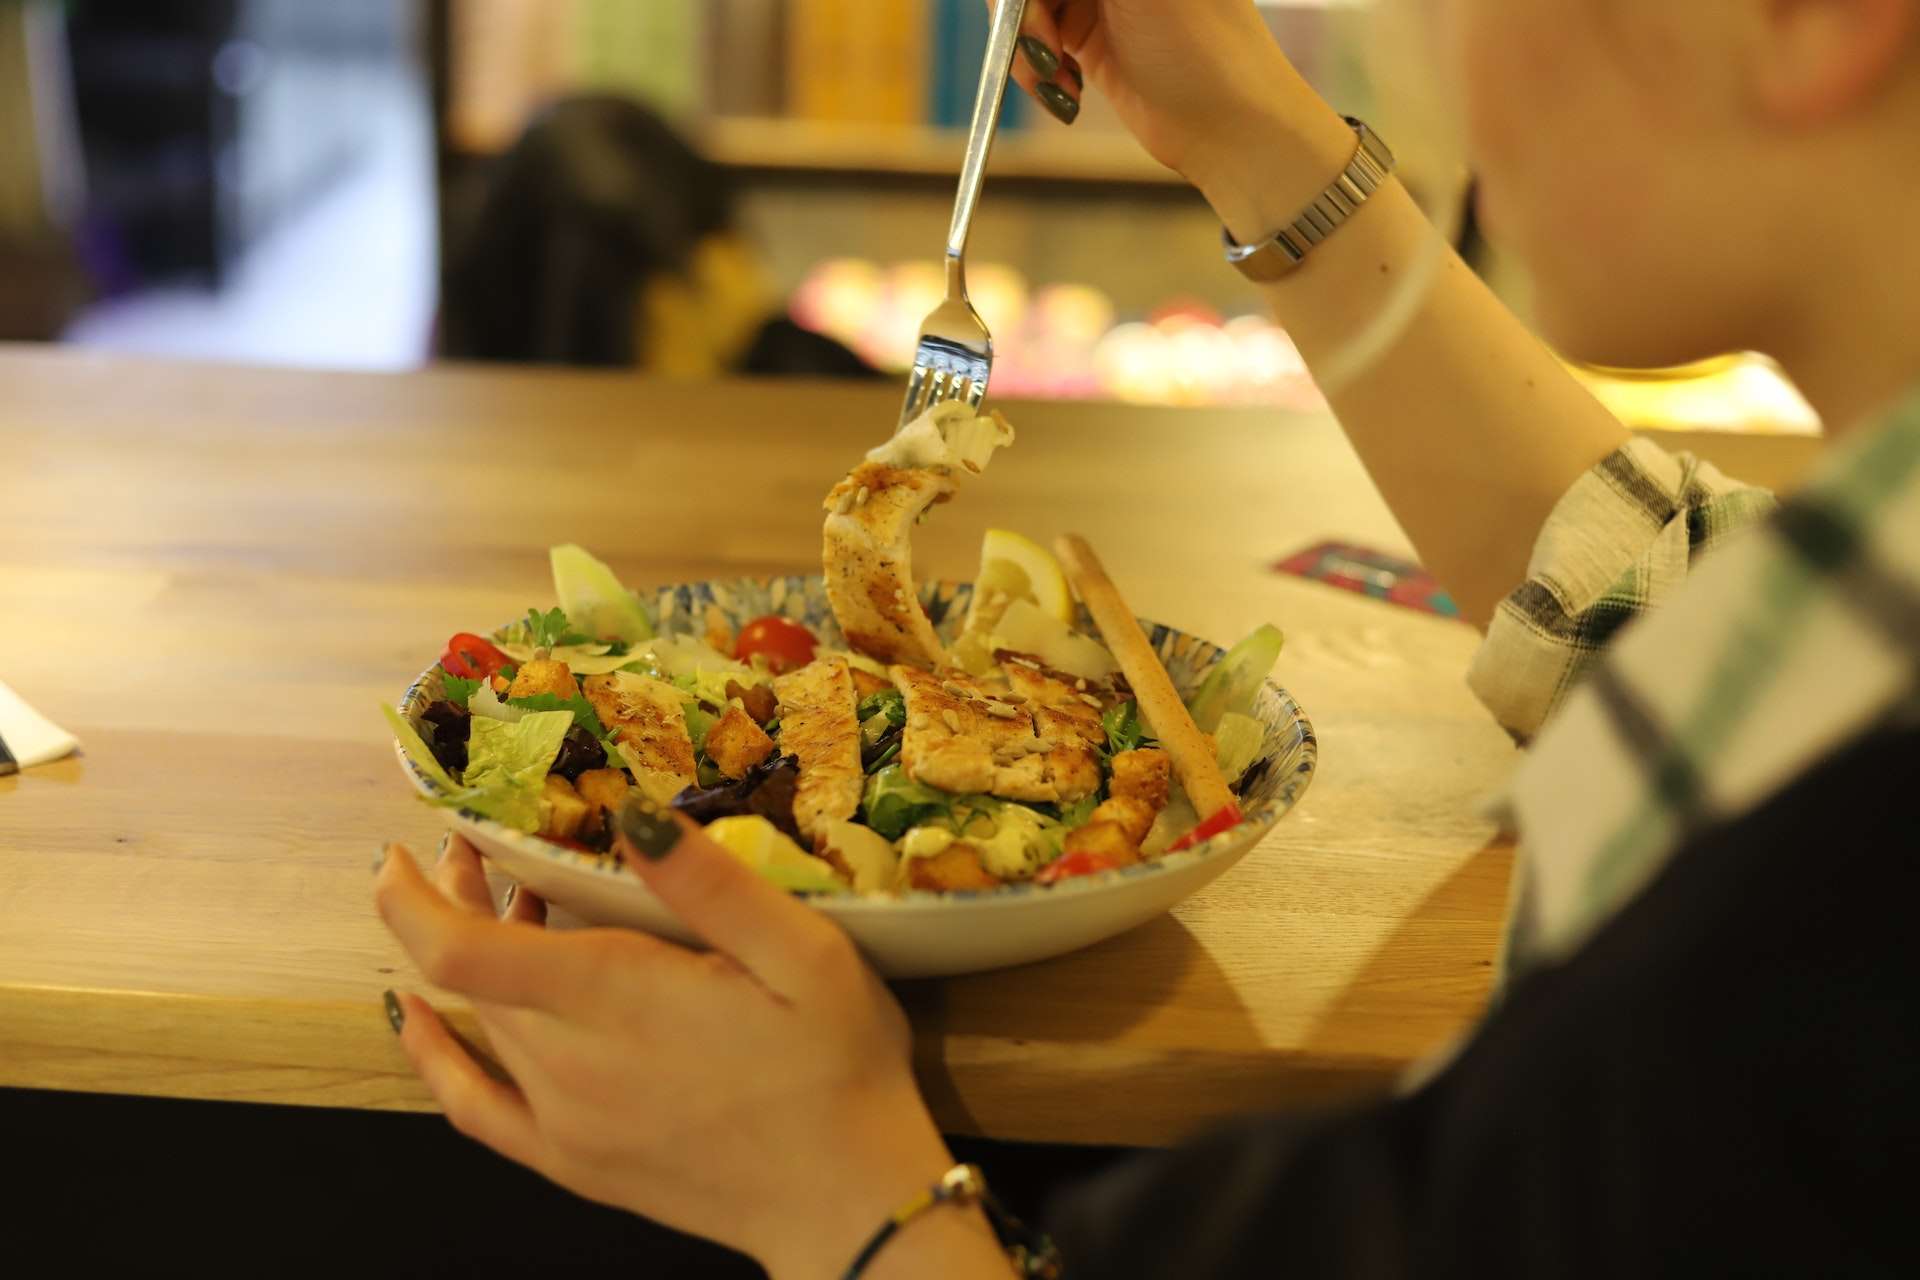 A Person Eating a Salad on a Plate 